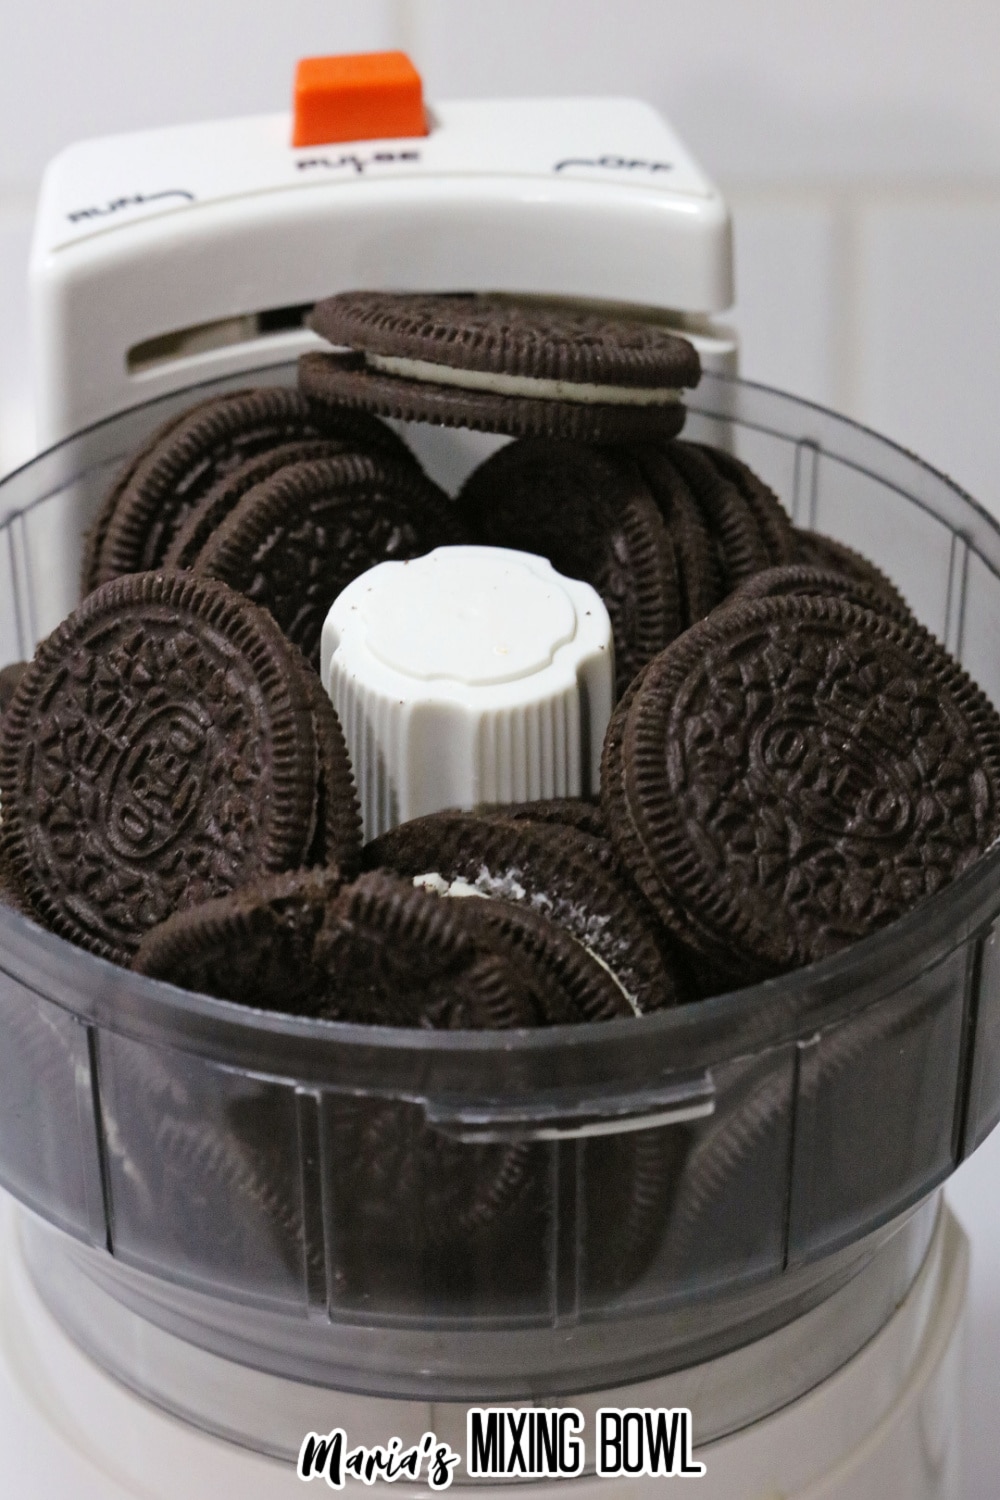 oreo cookies in a food processor